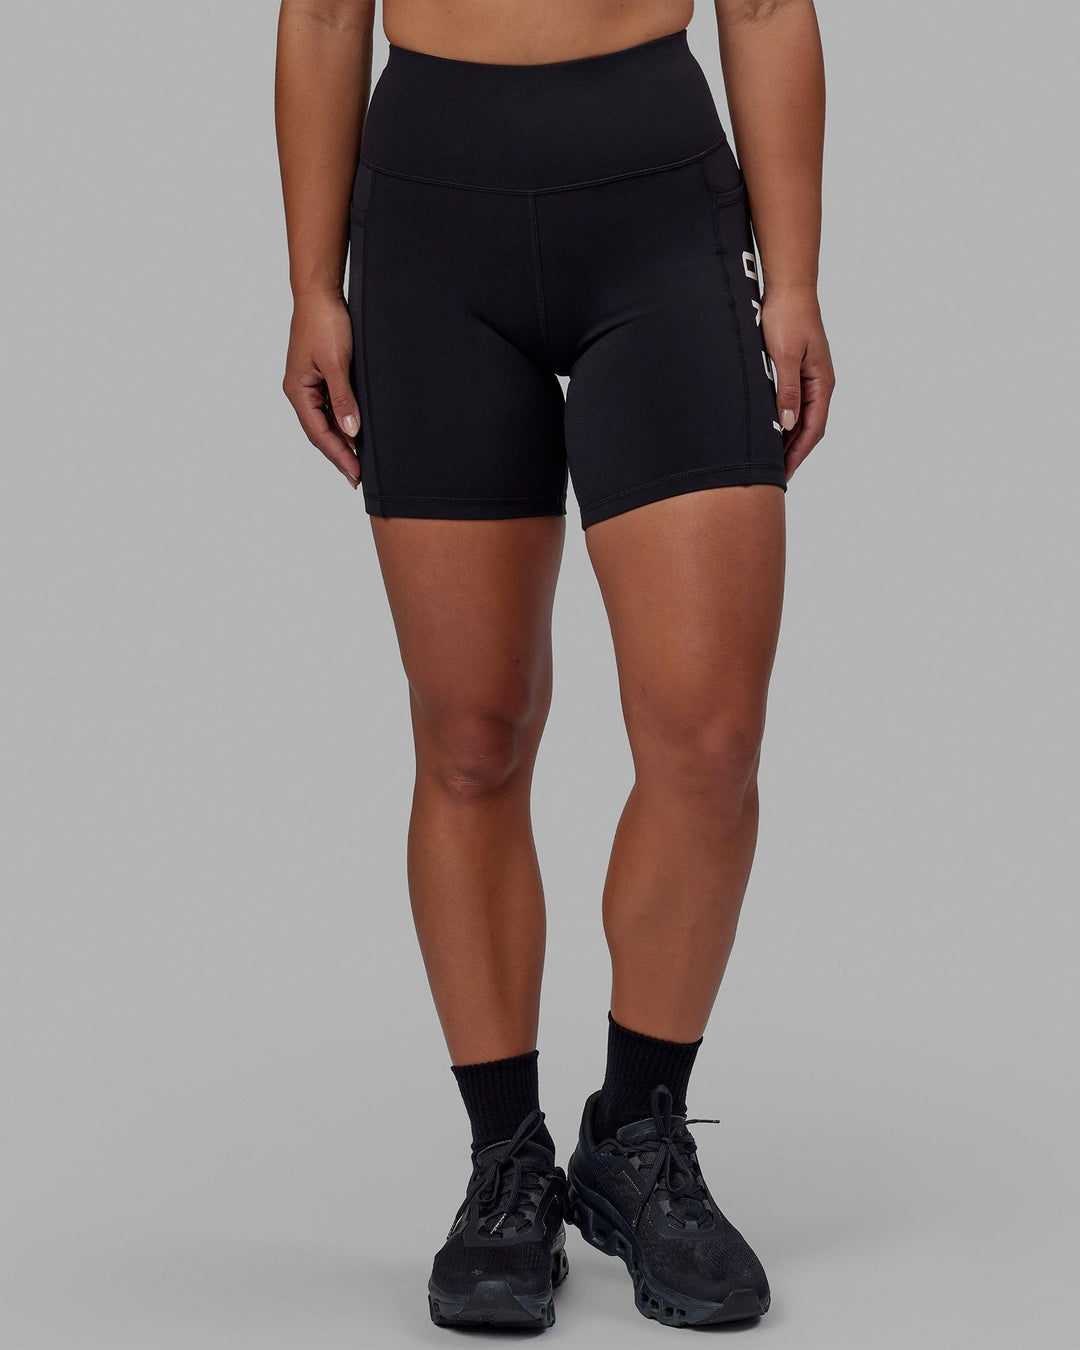 Woman wearing Rep Mid Short Tight - Black-White